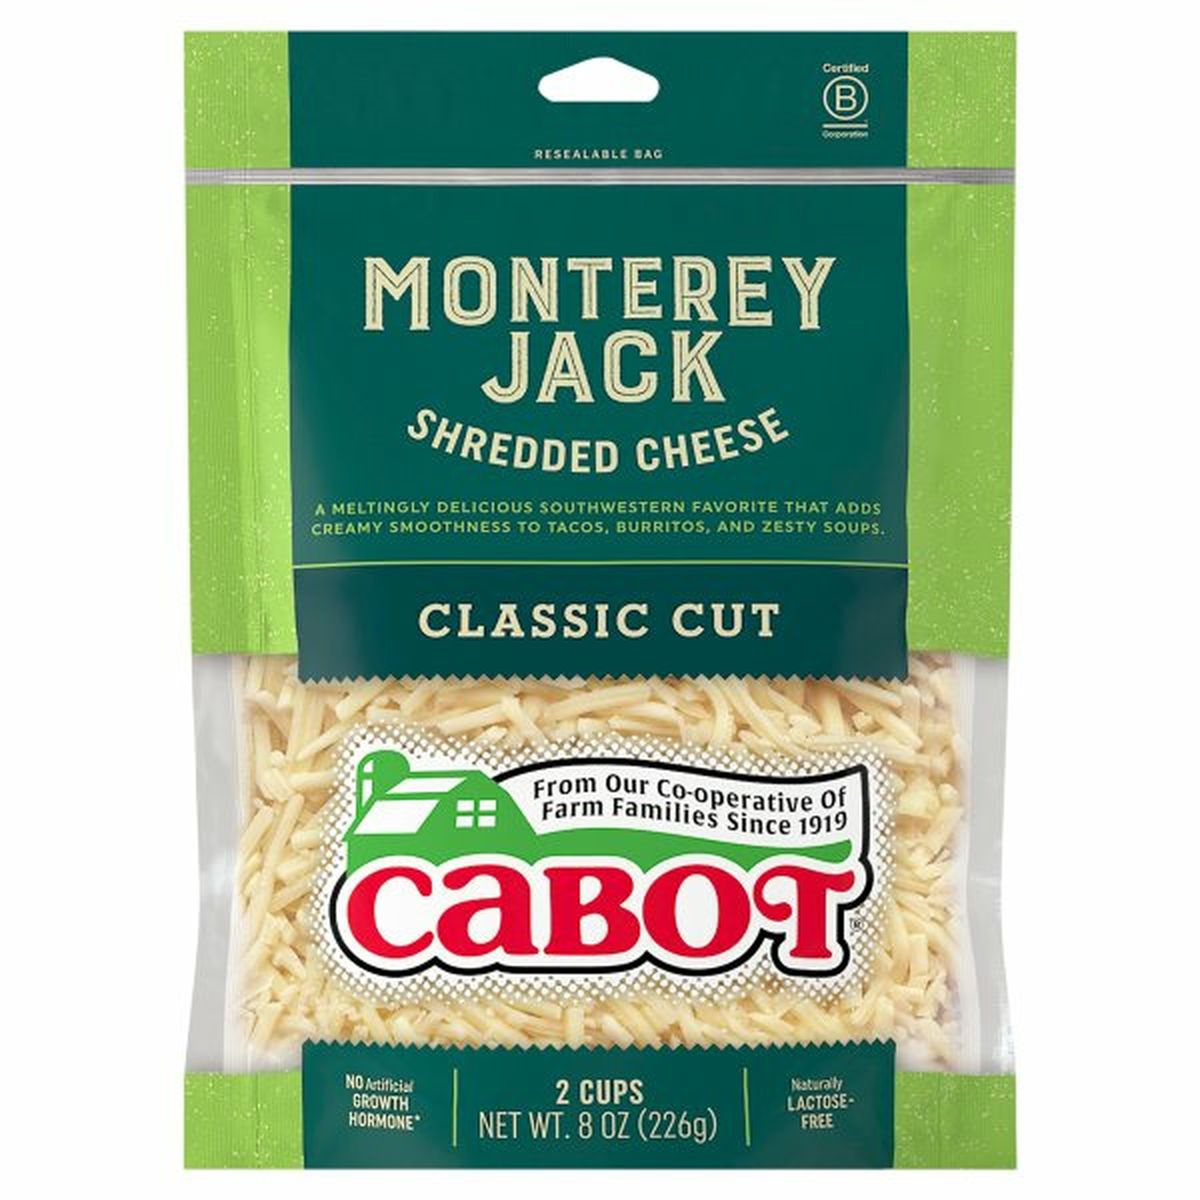 Calories in Cabot Shredded Cheese, Monterey Jack, Classic Cut